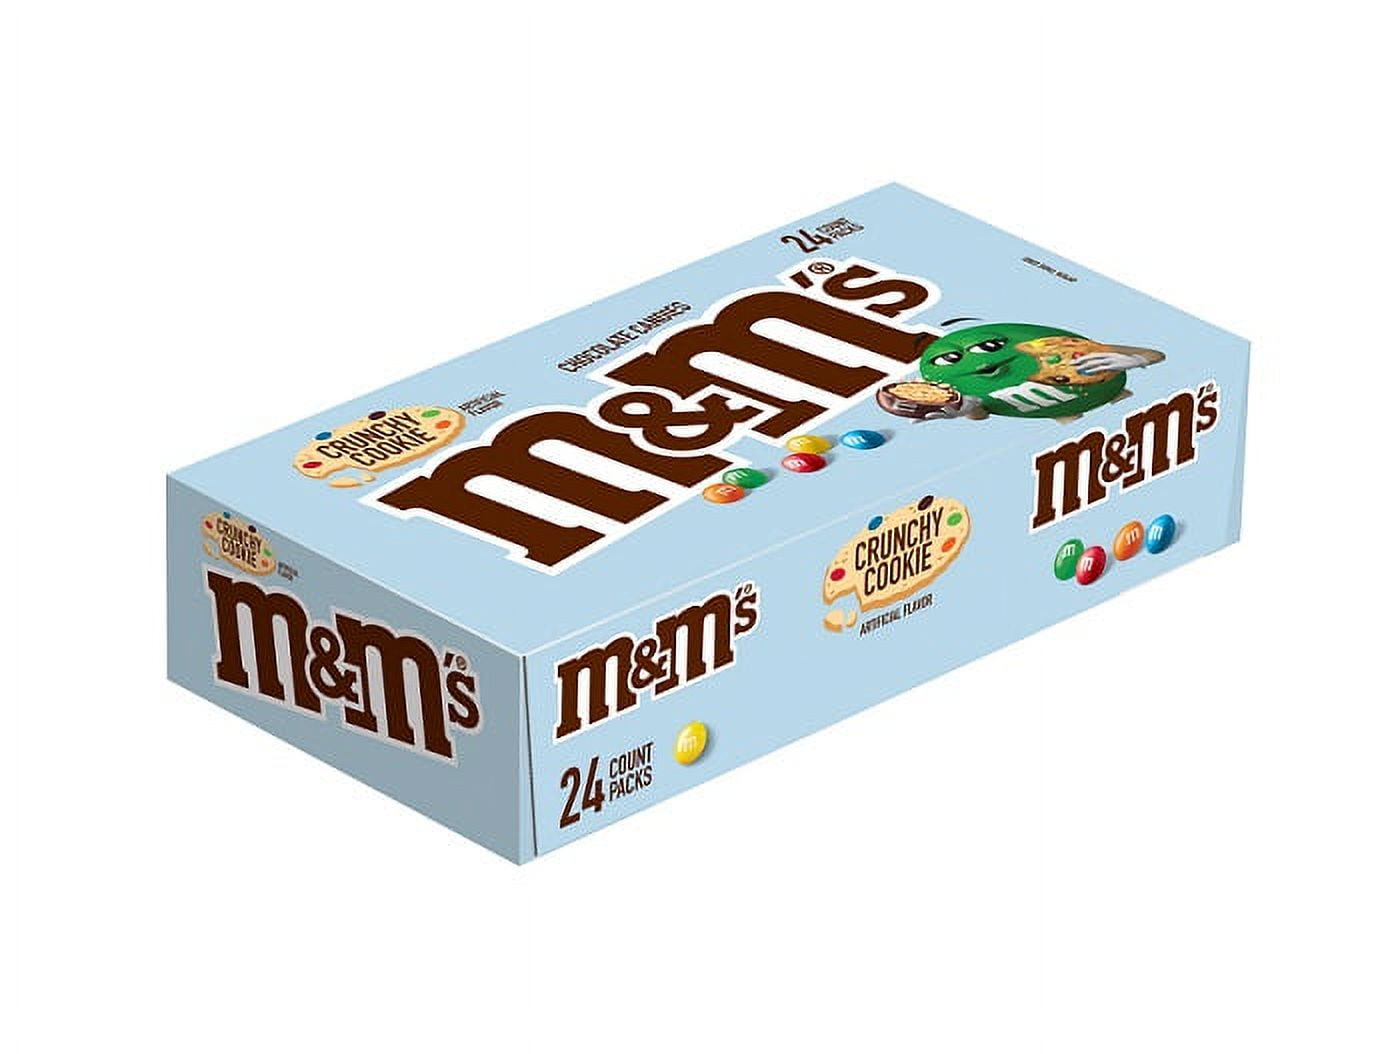 M&M's Crunchy Cookie Chocolate Candy - Share Size 2.83 oz